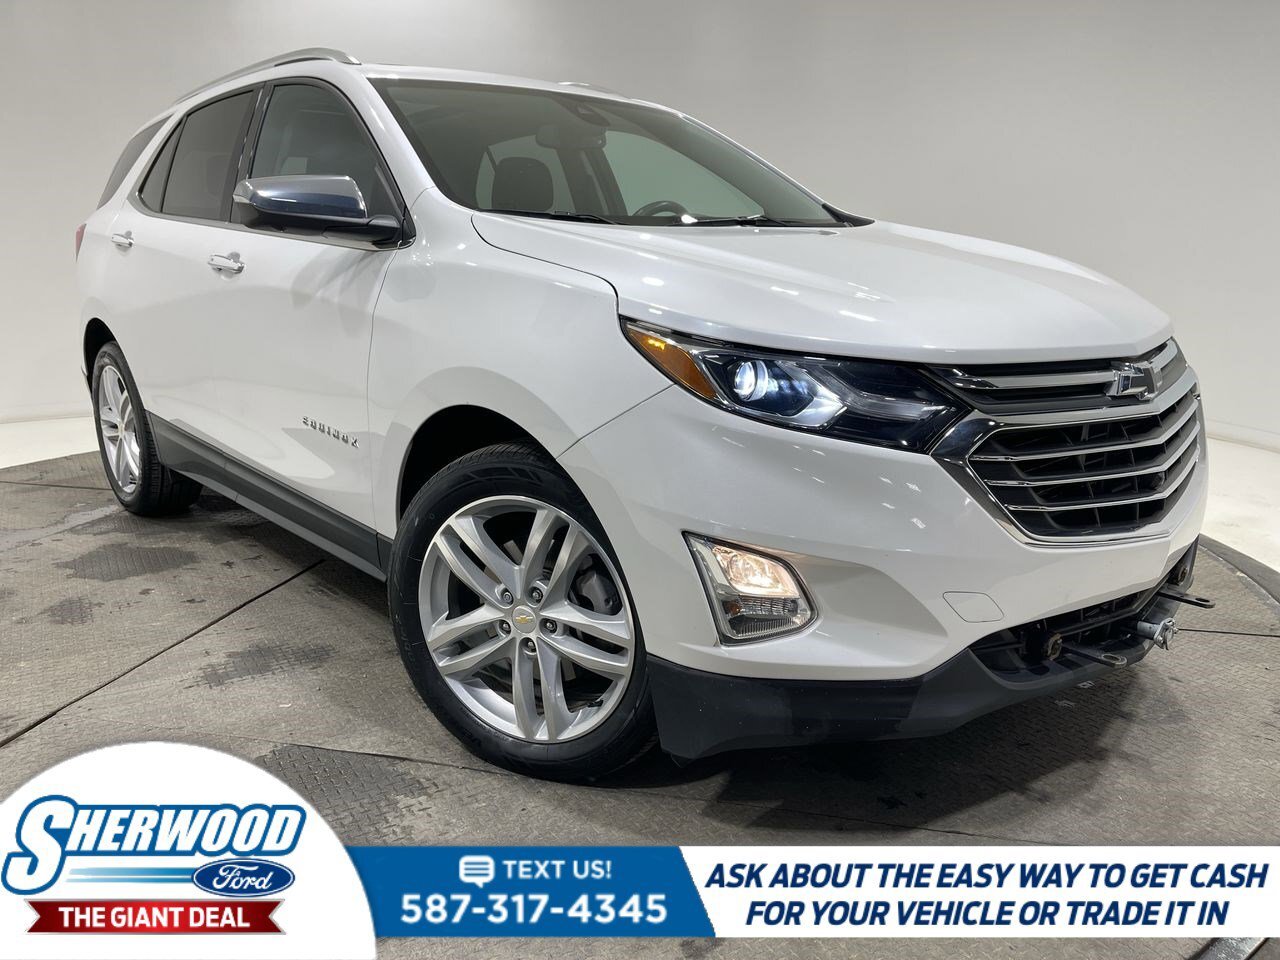 2019 Chevrolet Equinox Premier $0 Down $145 Weekly- NEW TIRES!